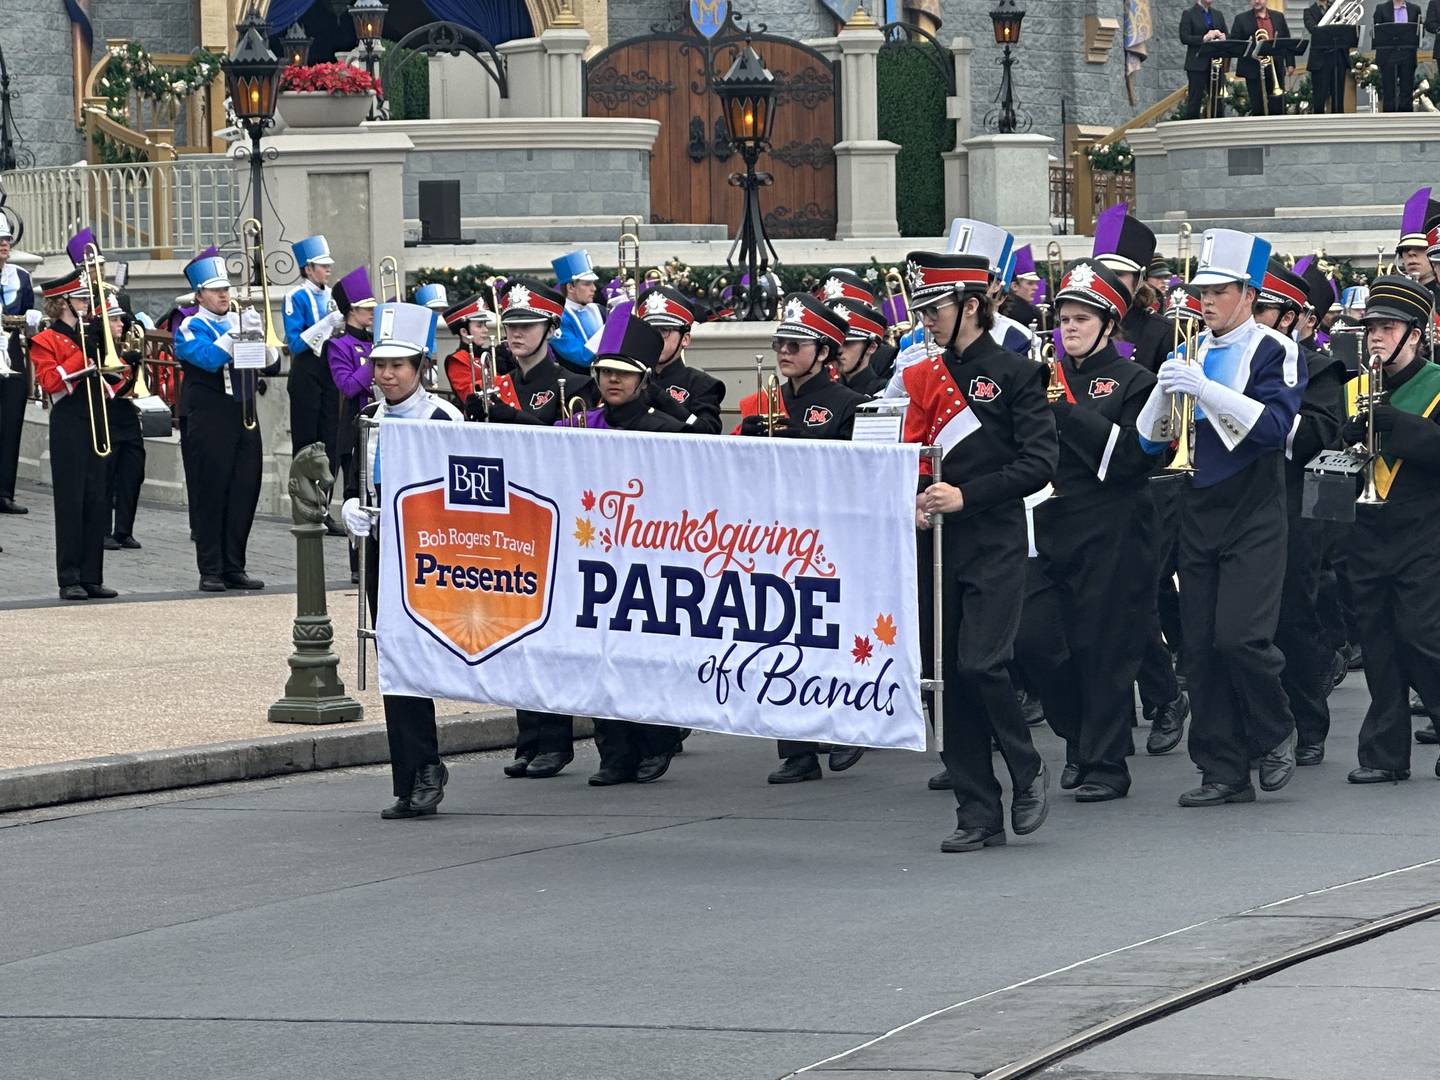 Minooka High School students perform at Disney World for the Thanksgiving Parade of the Bands.